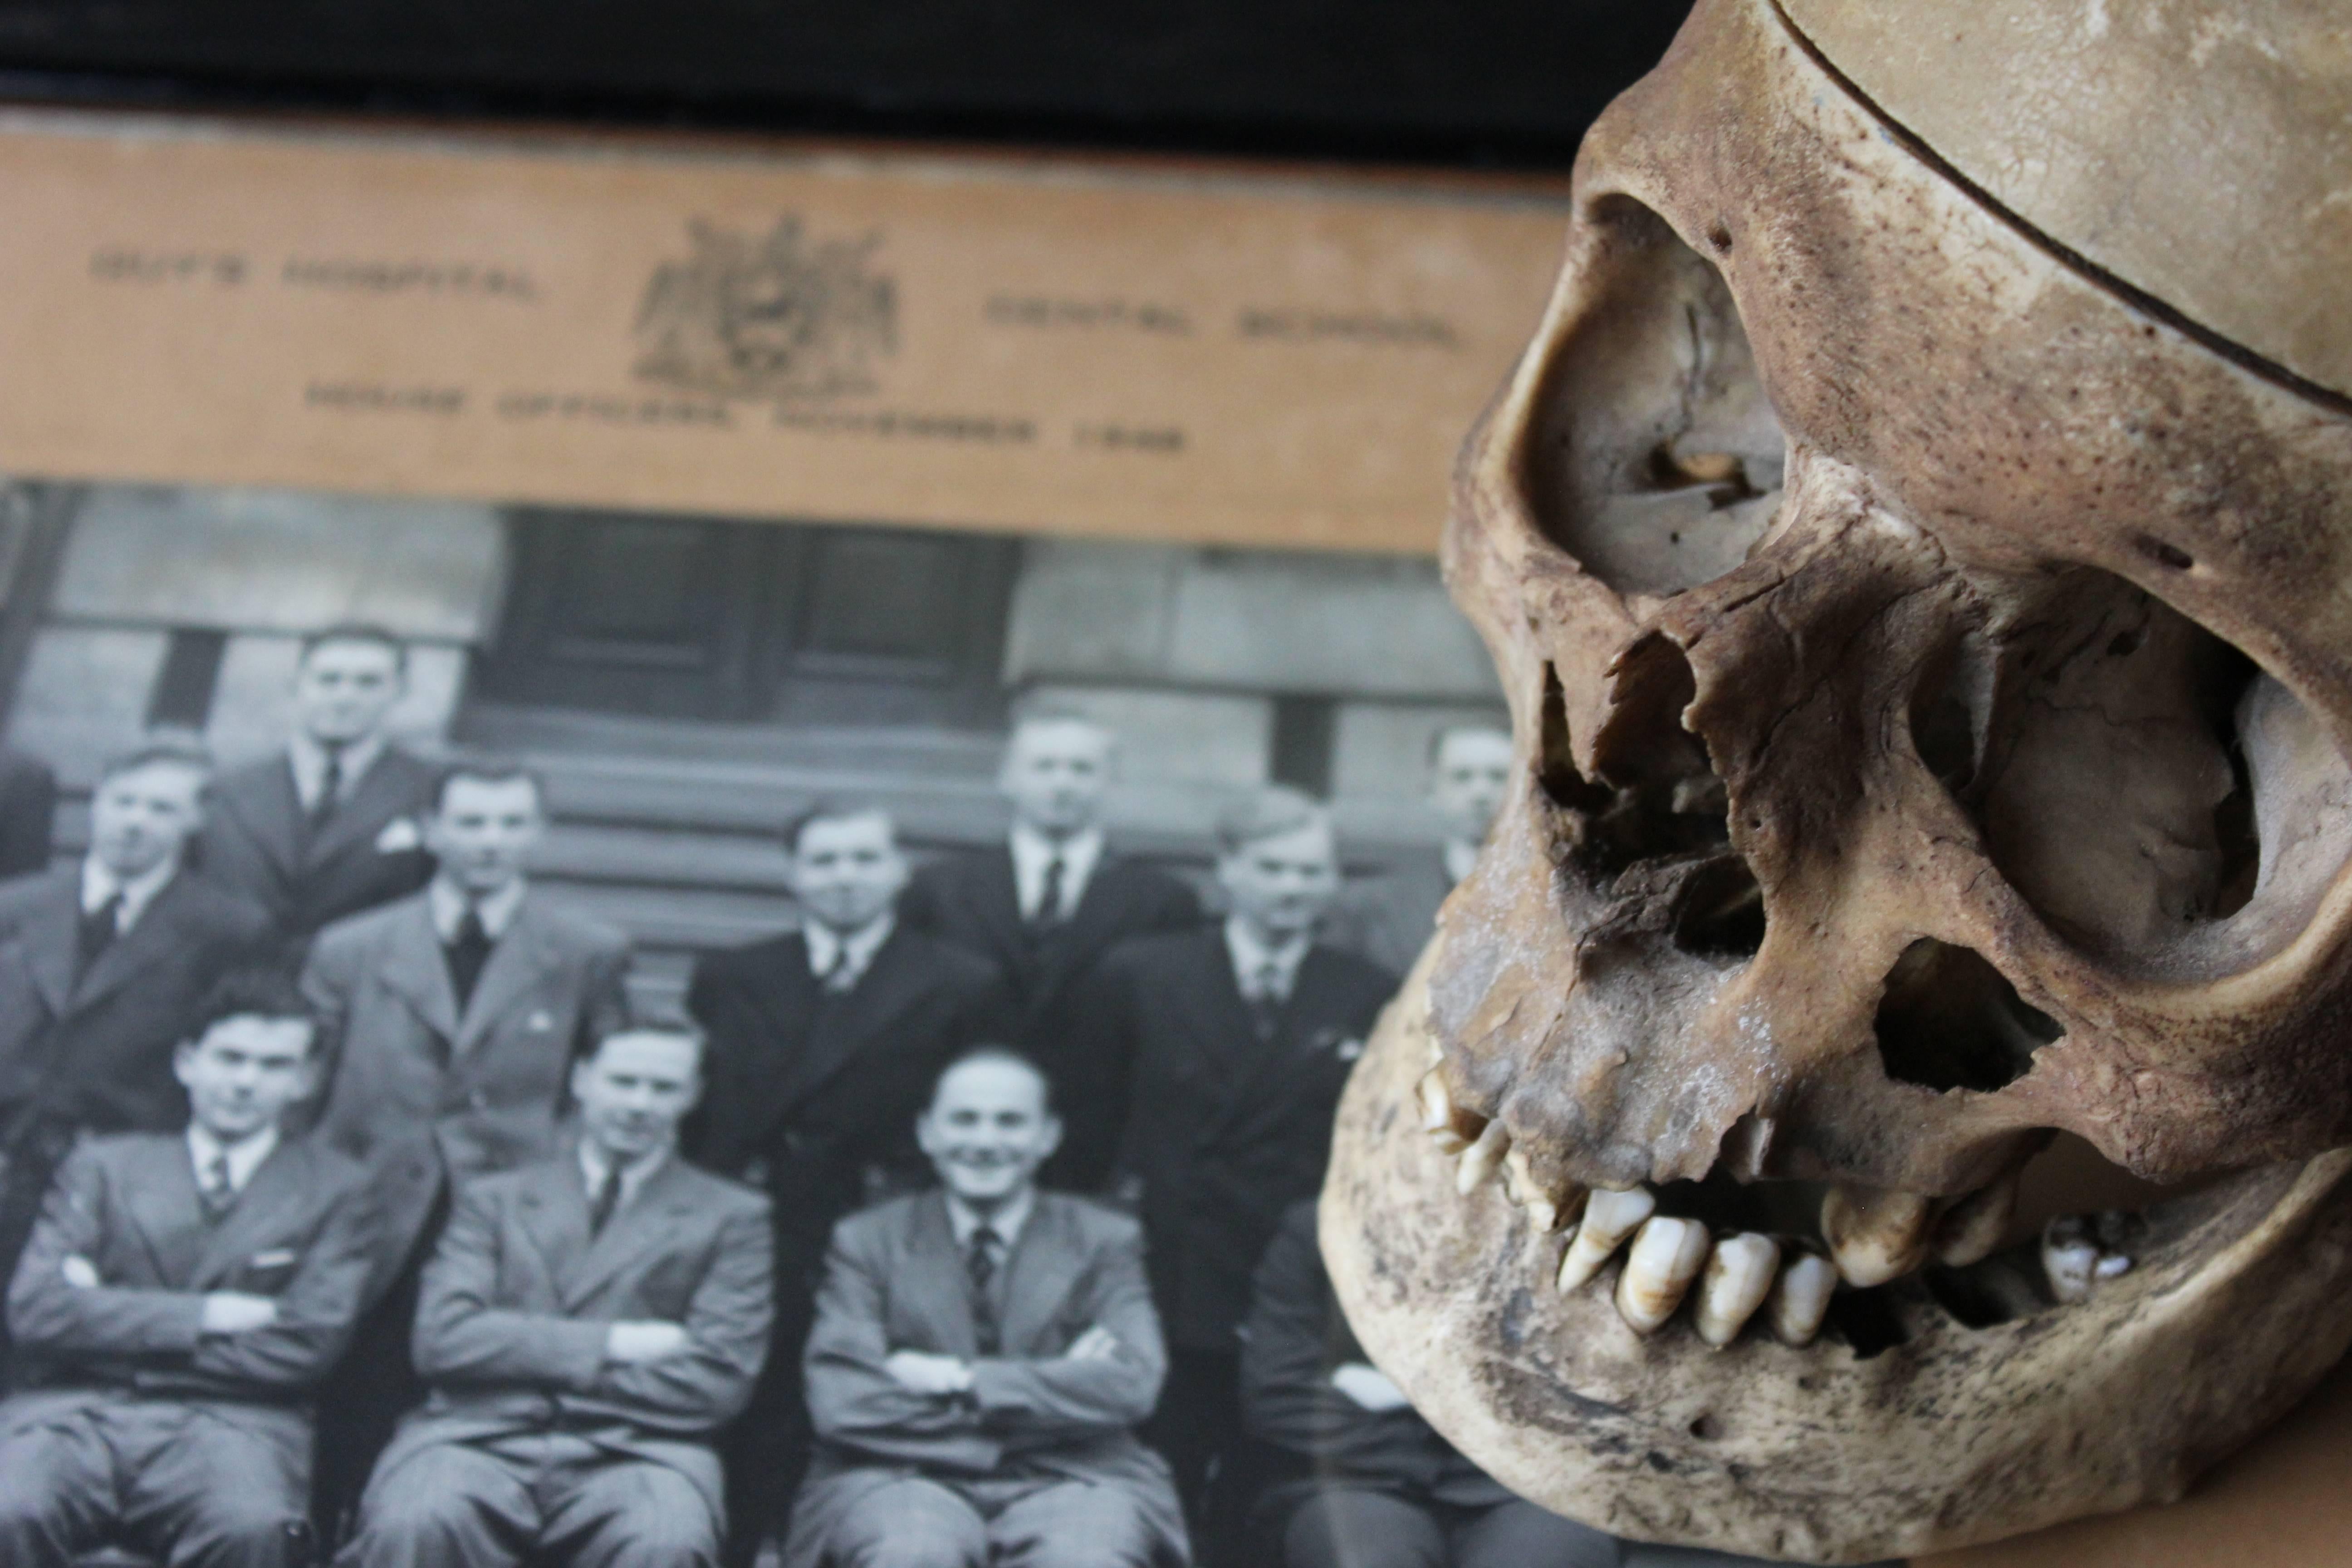 Early 20thc Human Skull for Odontology and Medical Study from Guy's Hospital 2